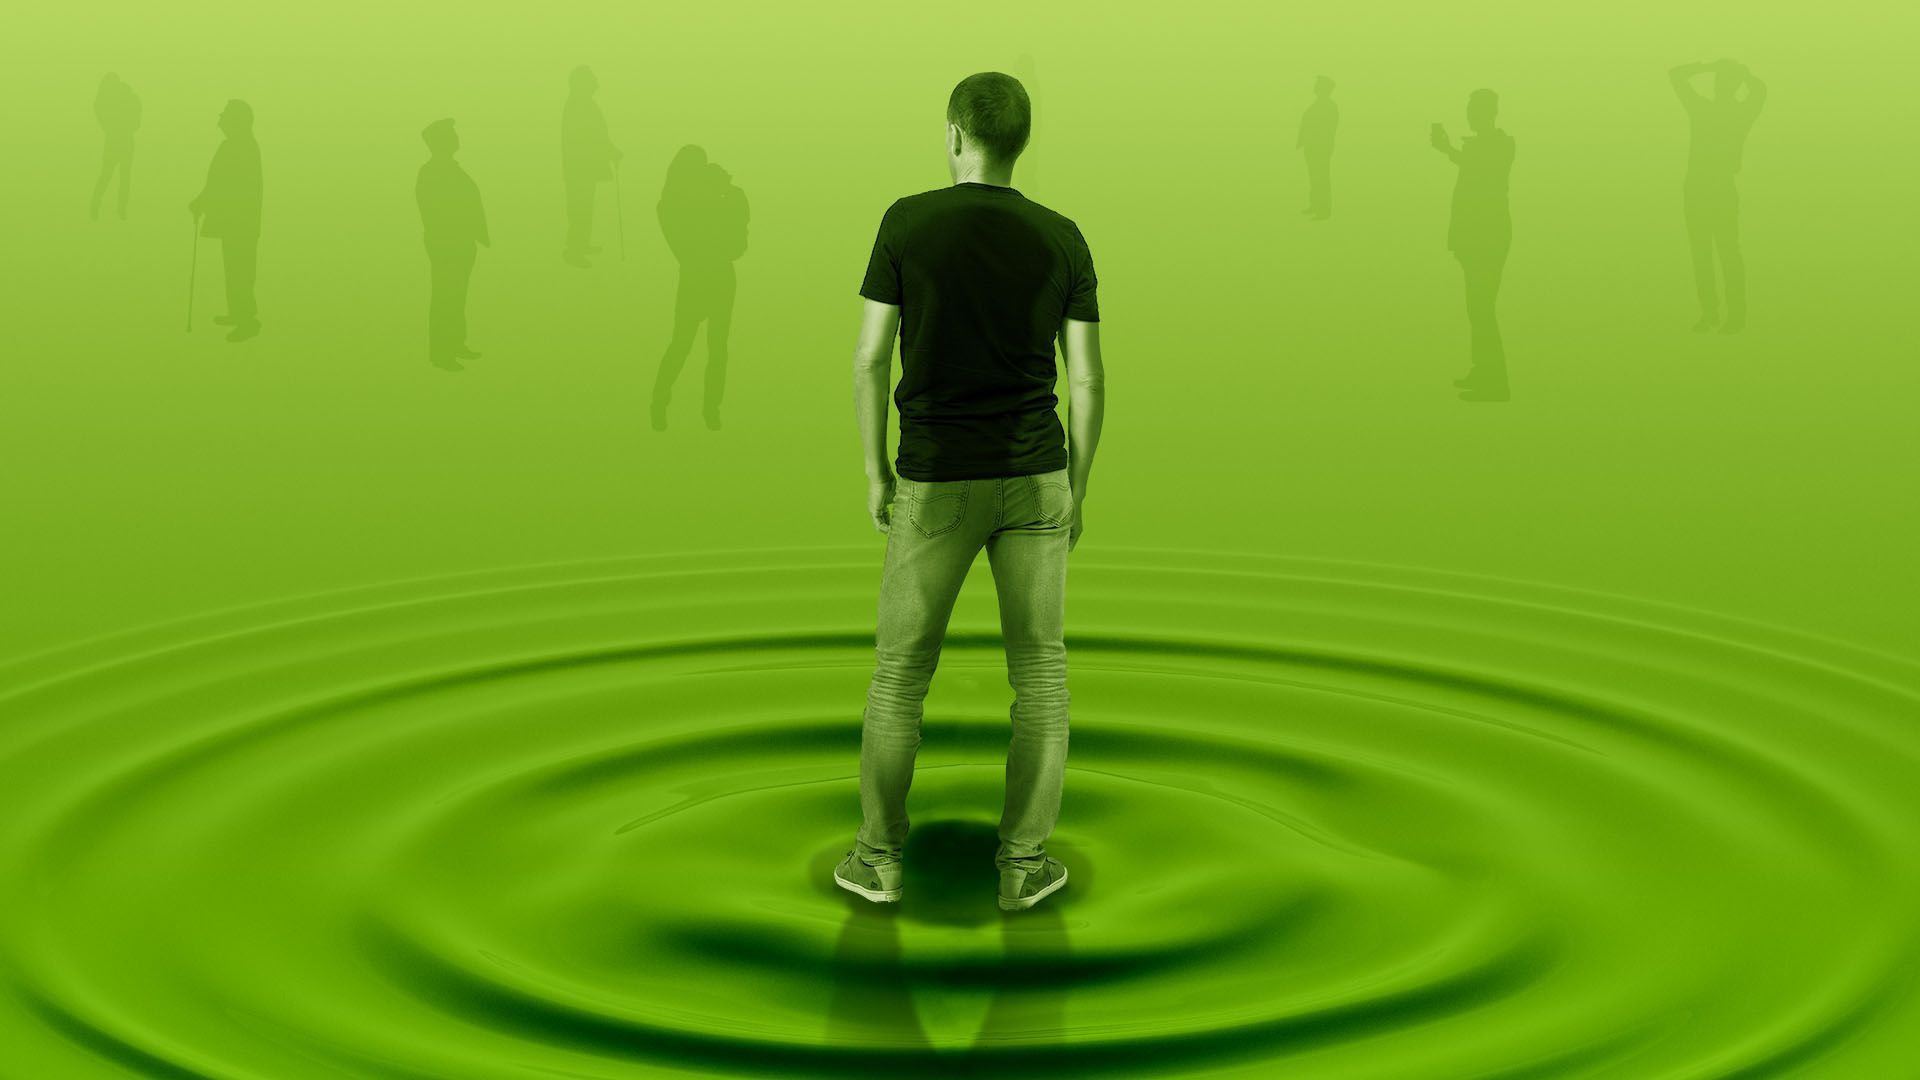 Illustration of a person from behind standing on a spreading ripple going out to figures in the distance